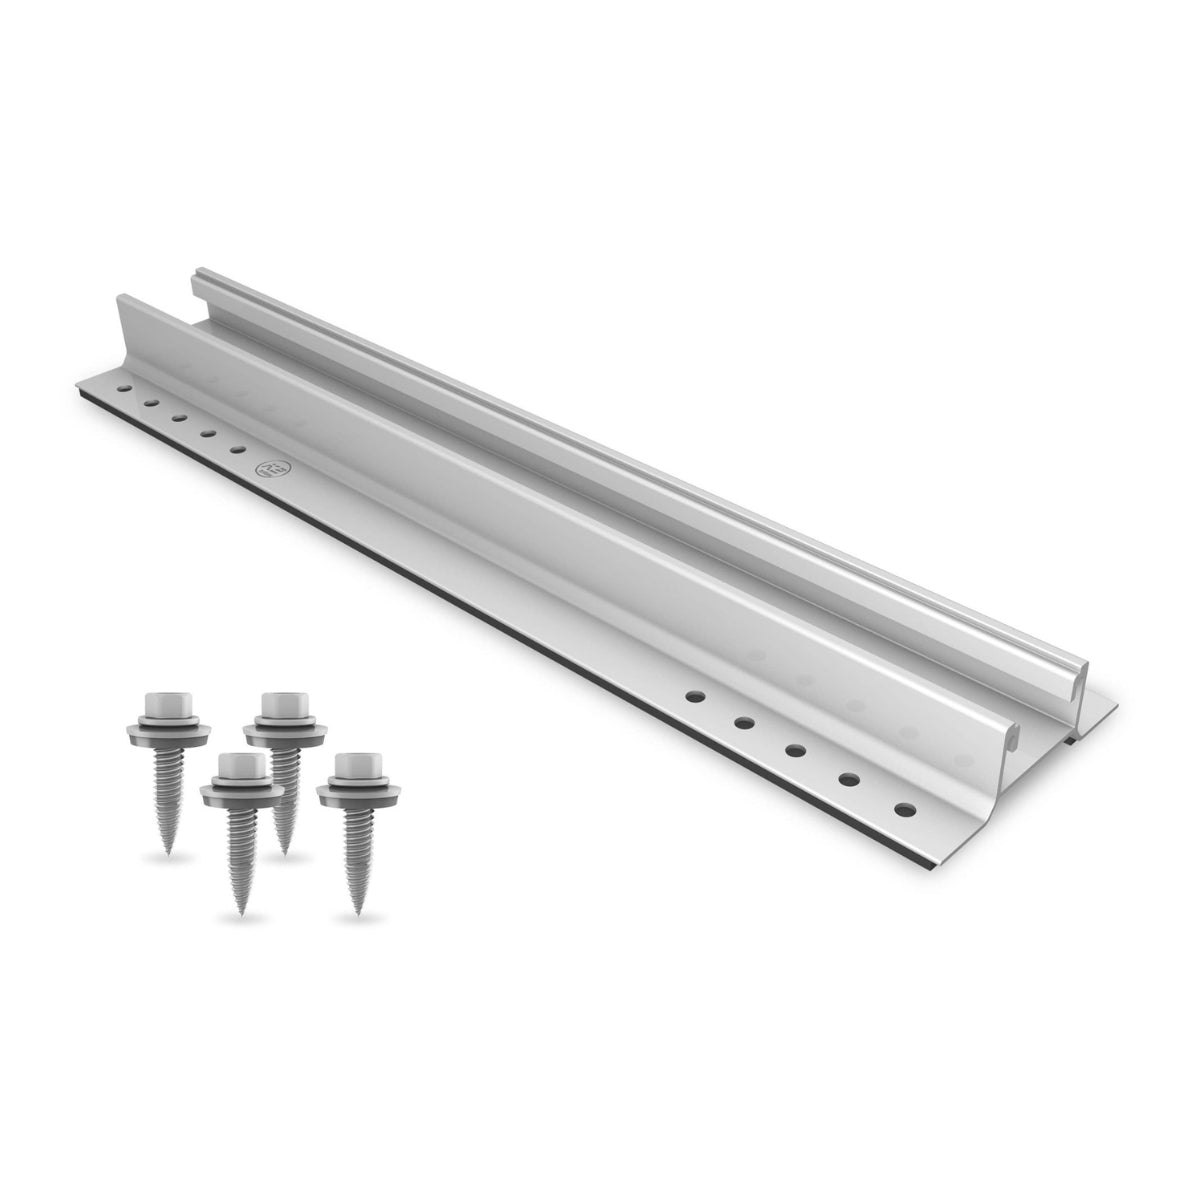 K2-Systems IBR Roof MiniRail MK2 2 Panel Roof Mounting System